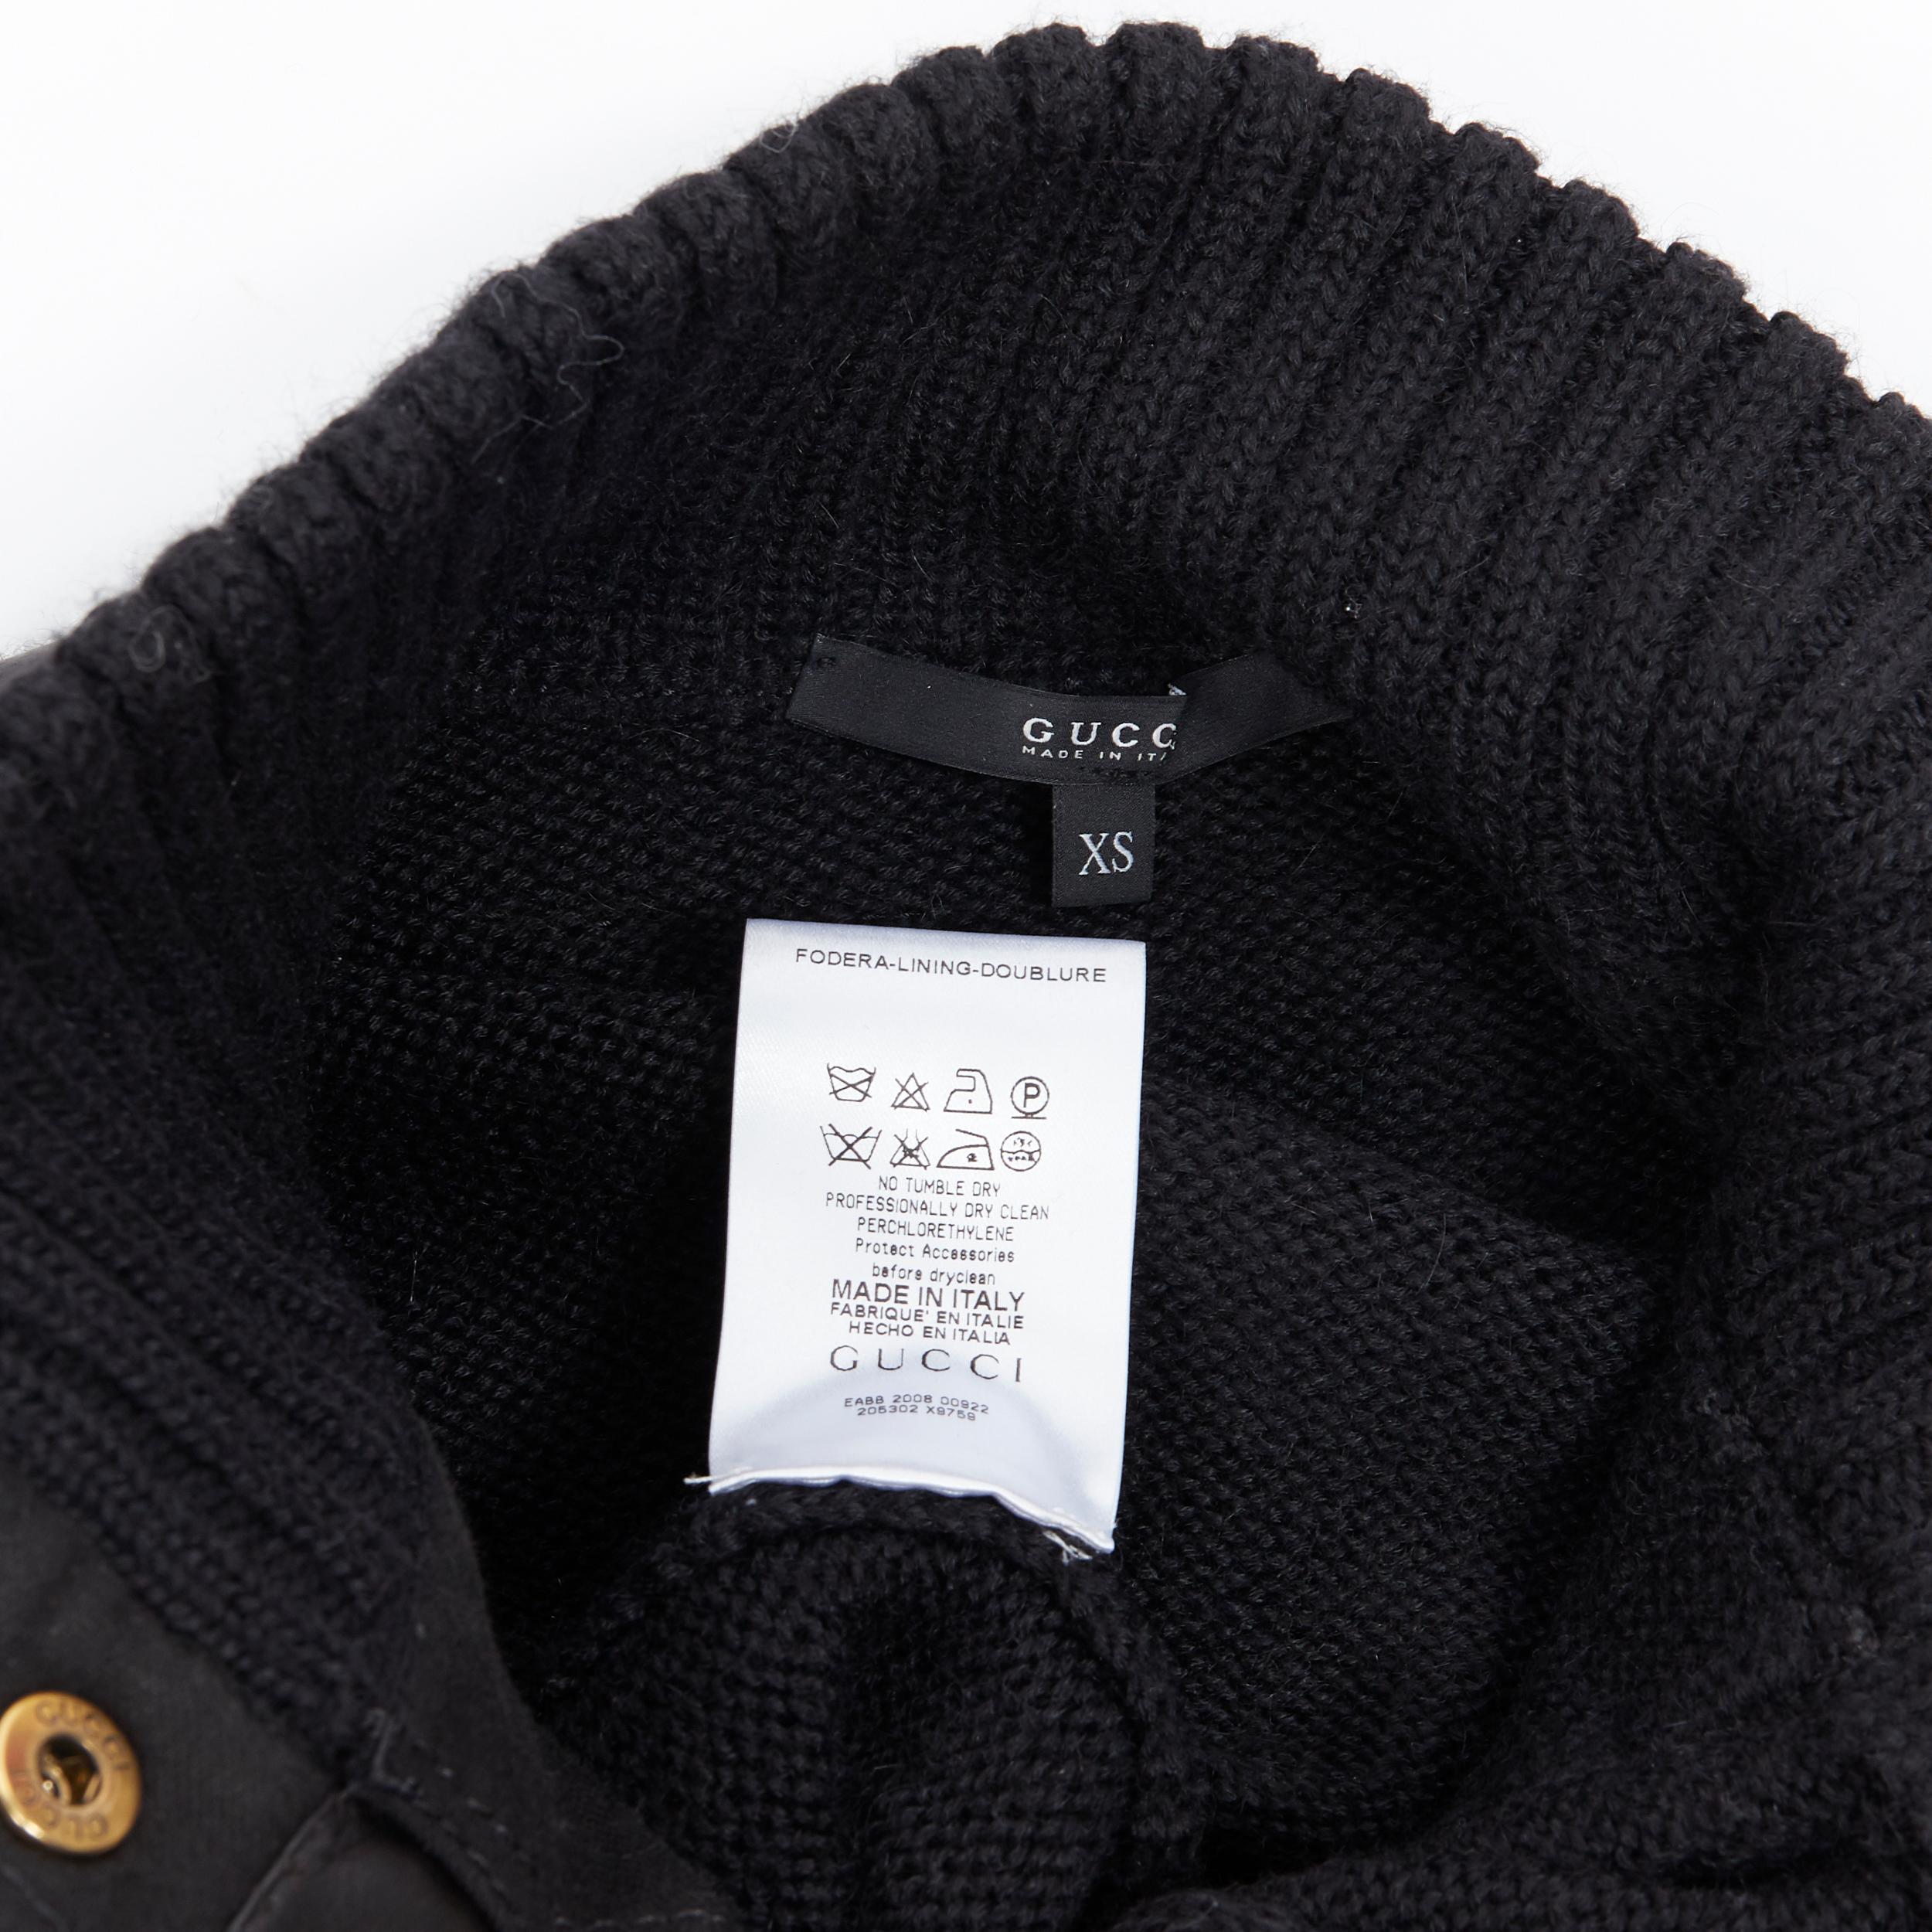 GUCCI 2008 black alpaca wool leather trimmed gold buckle turtleneck sweater XS 2